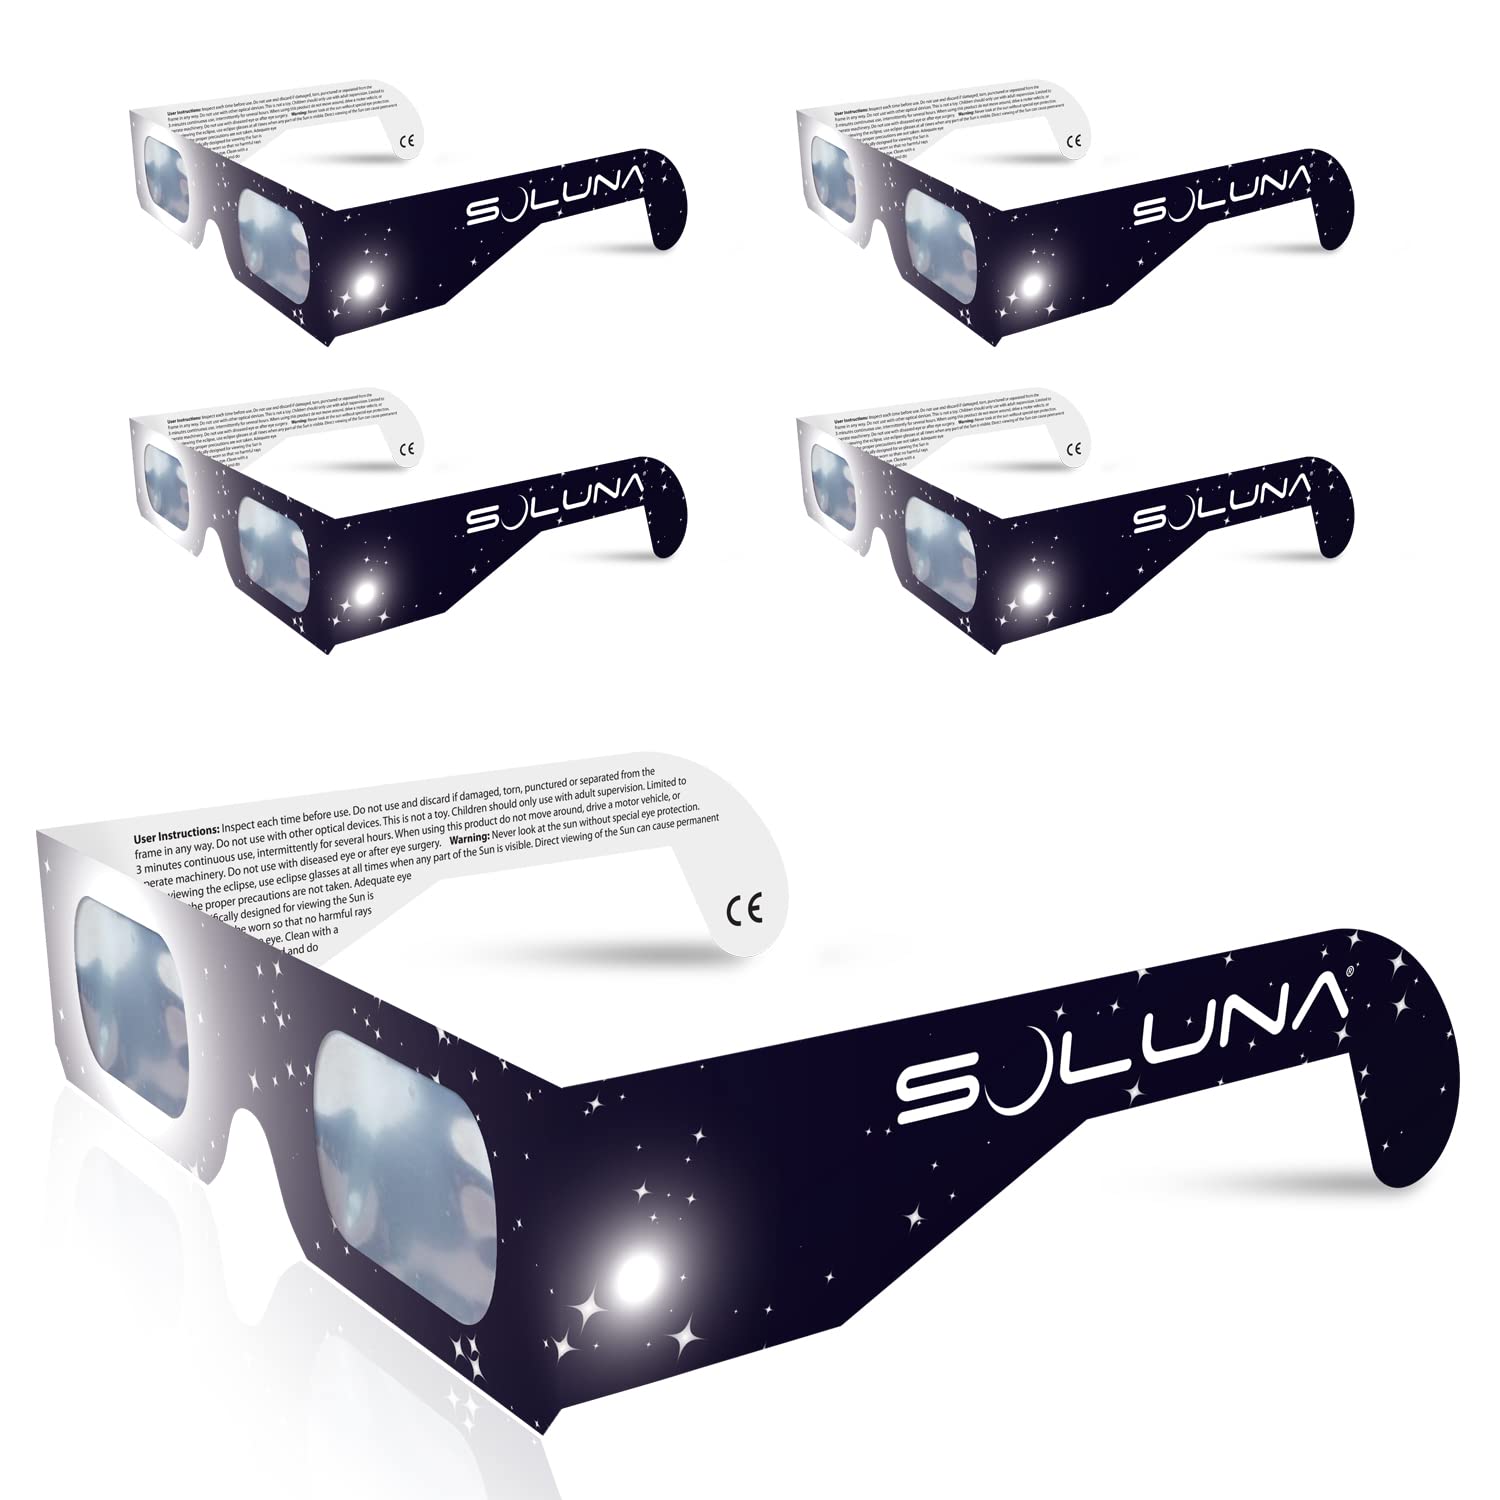 Soluna Solar Eclipse glasses - cE and ISO certified Safe Shades for Direct Sun Viewing - Made in the USA (5 Pack)